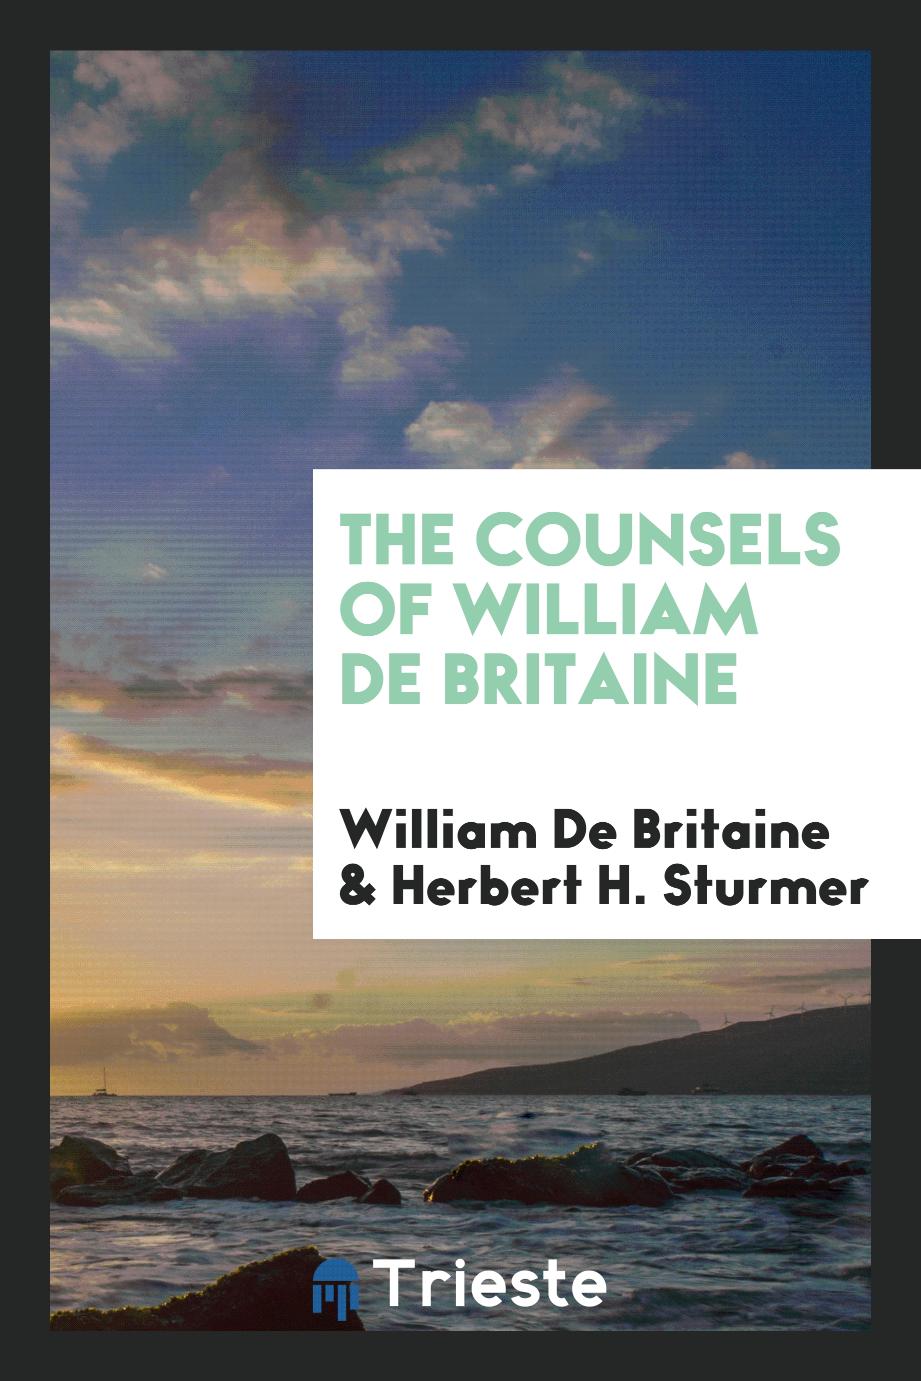 The counsels of William de Britaine